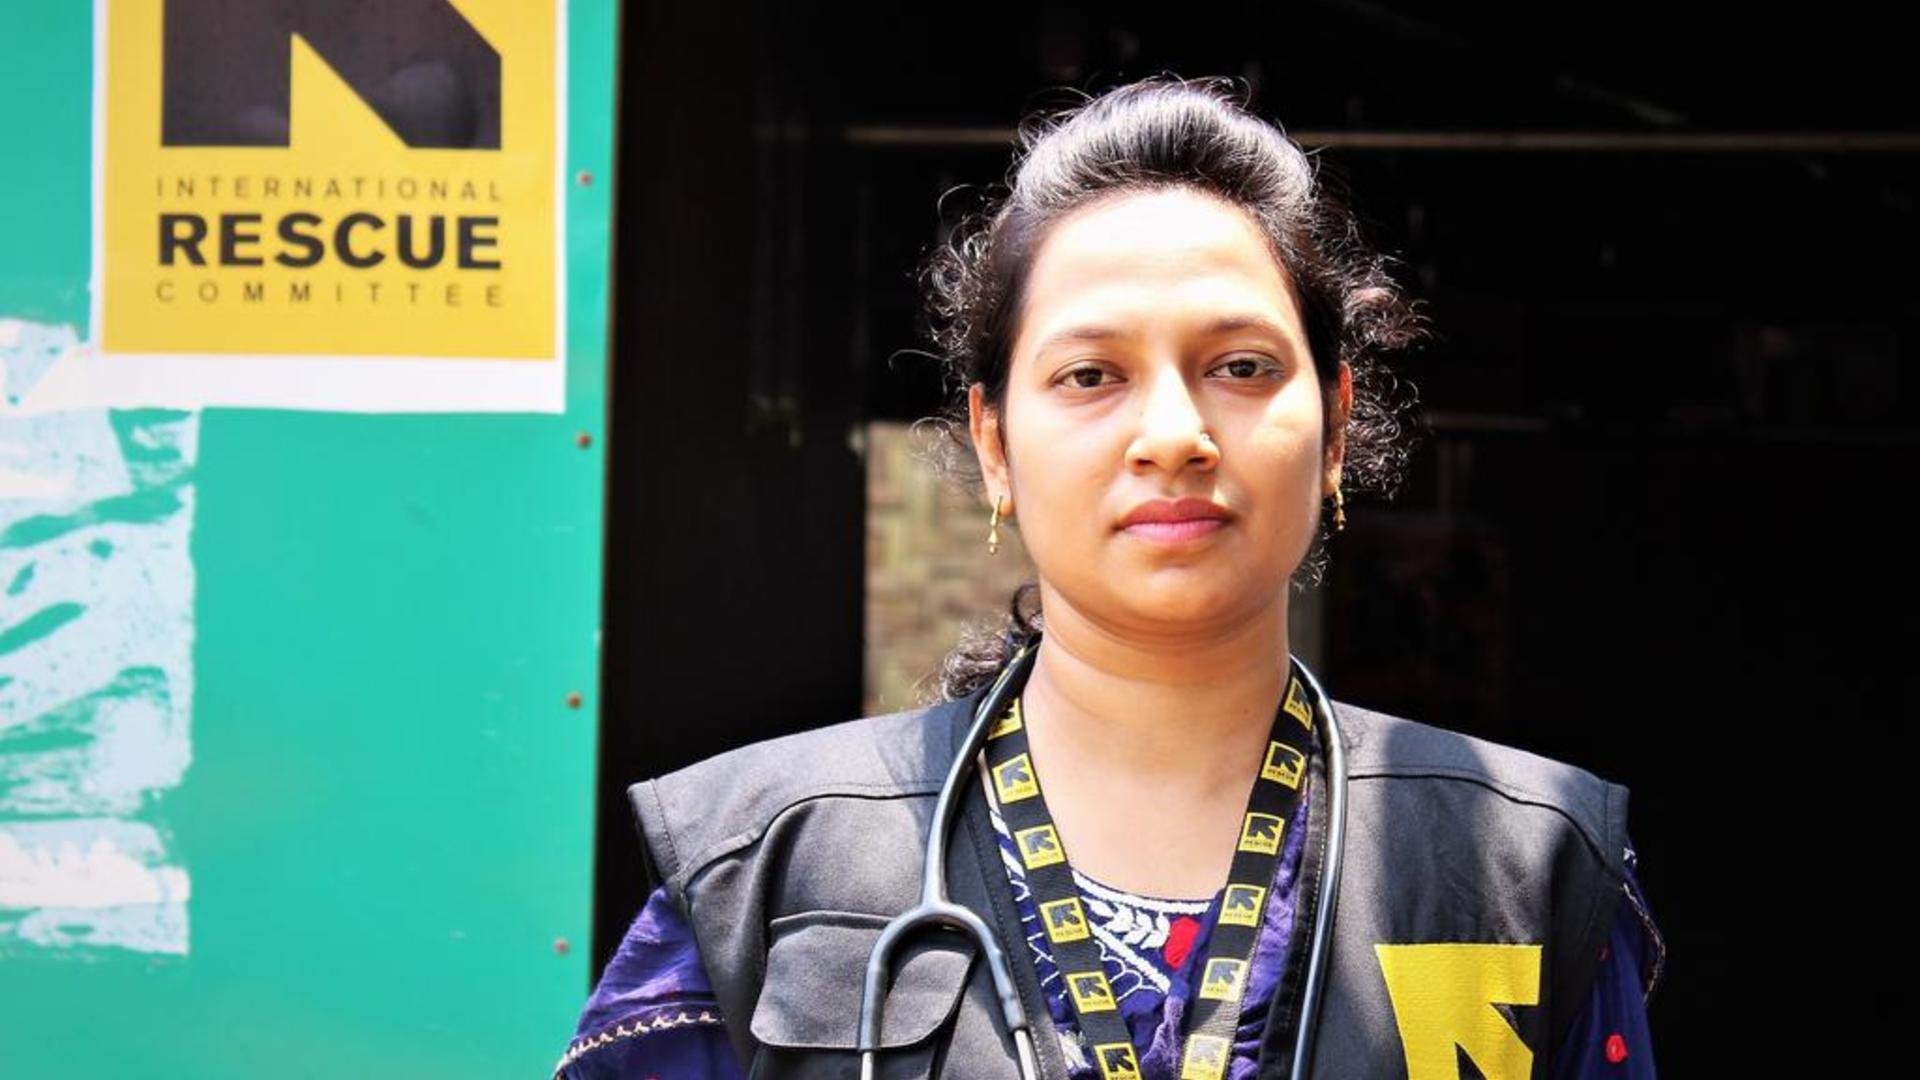 Kaniz Fatema works for the IRC as a midwife in Cox's Bazar